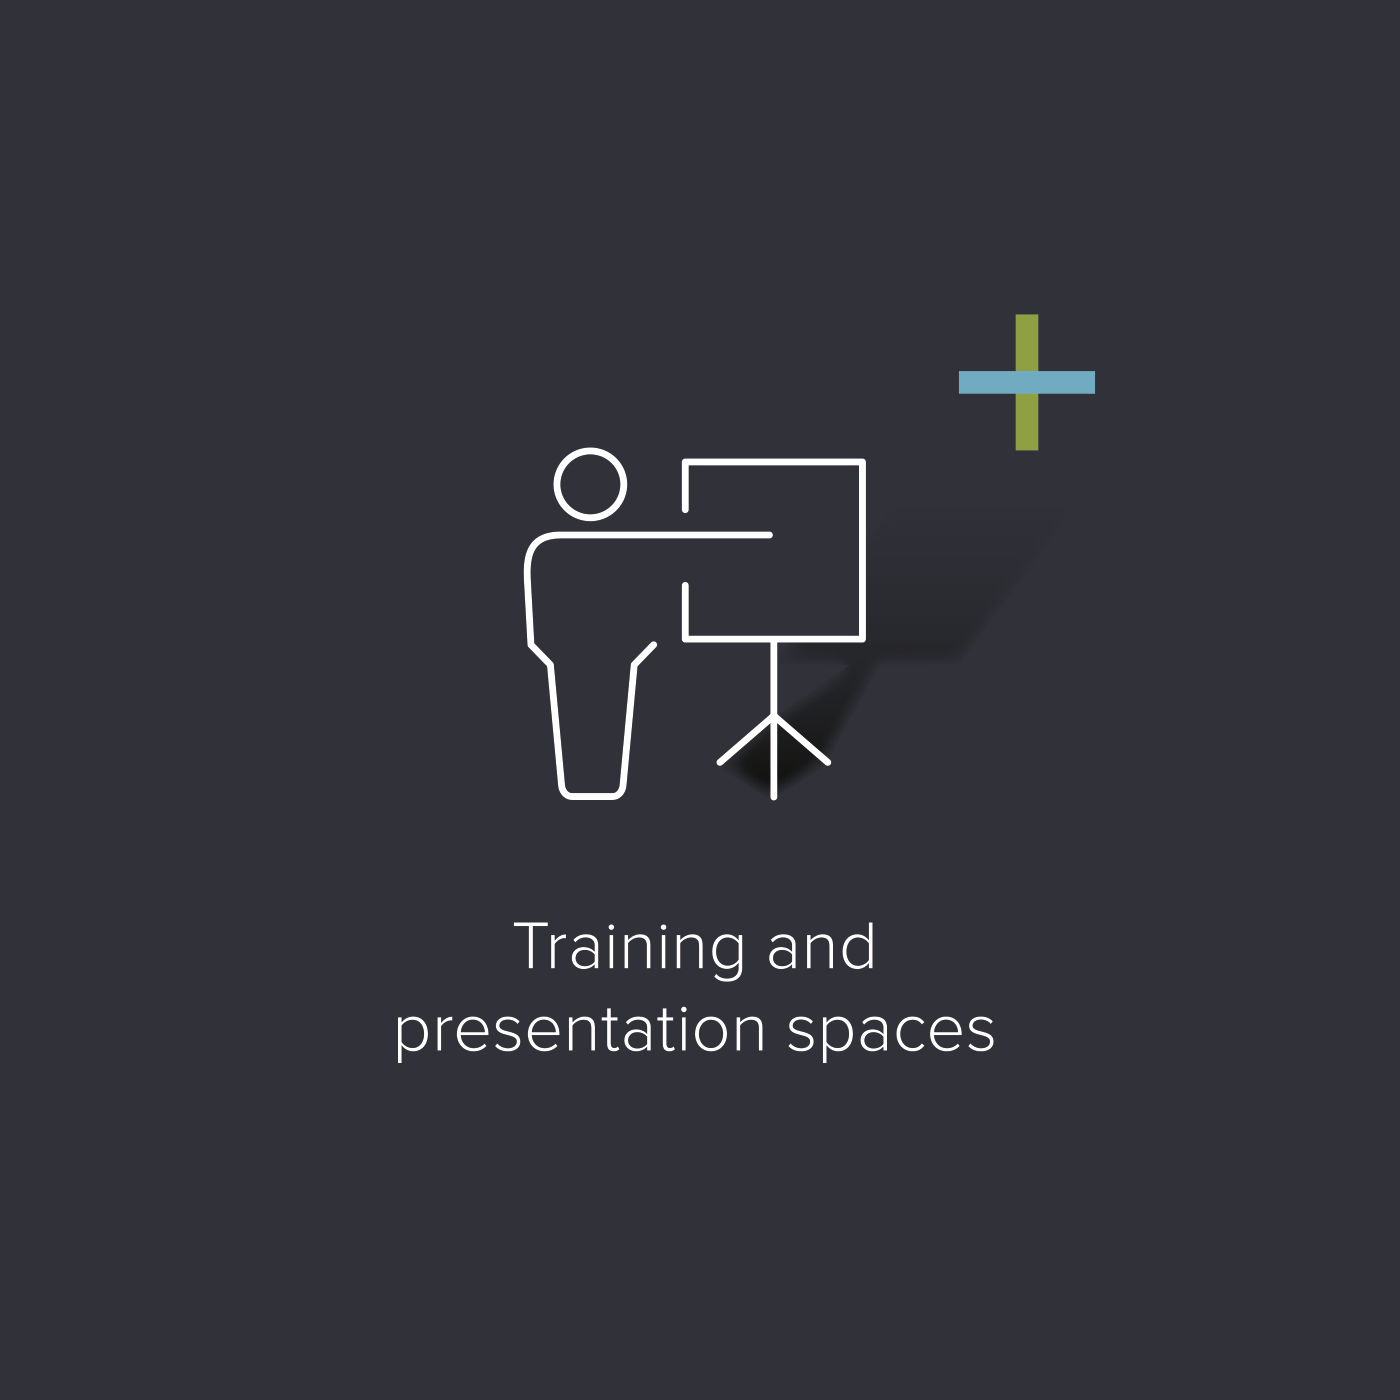 Training and presentation spaces